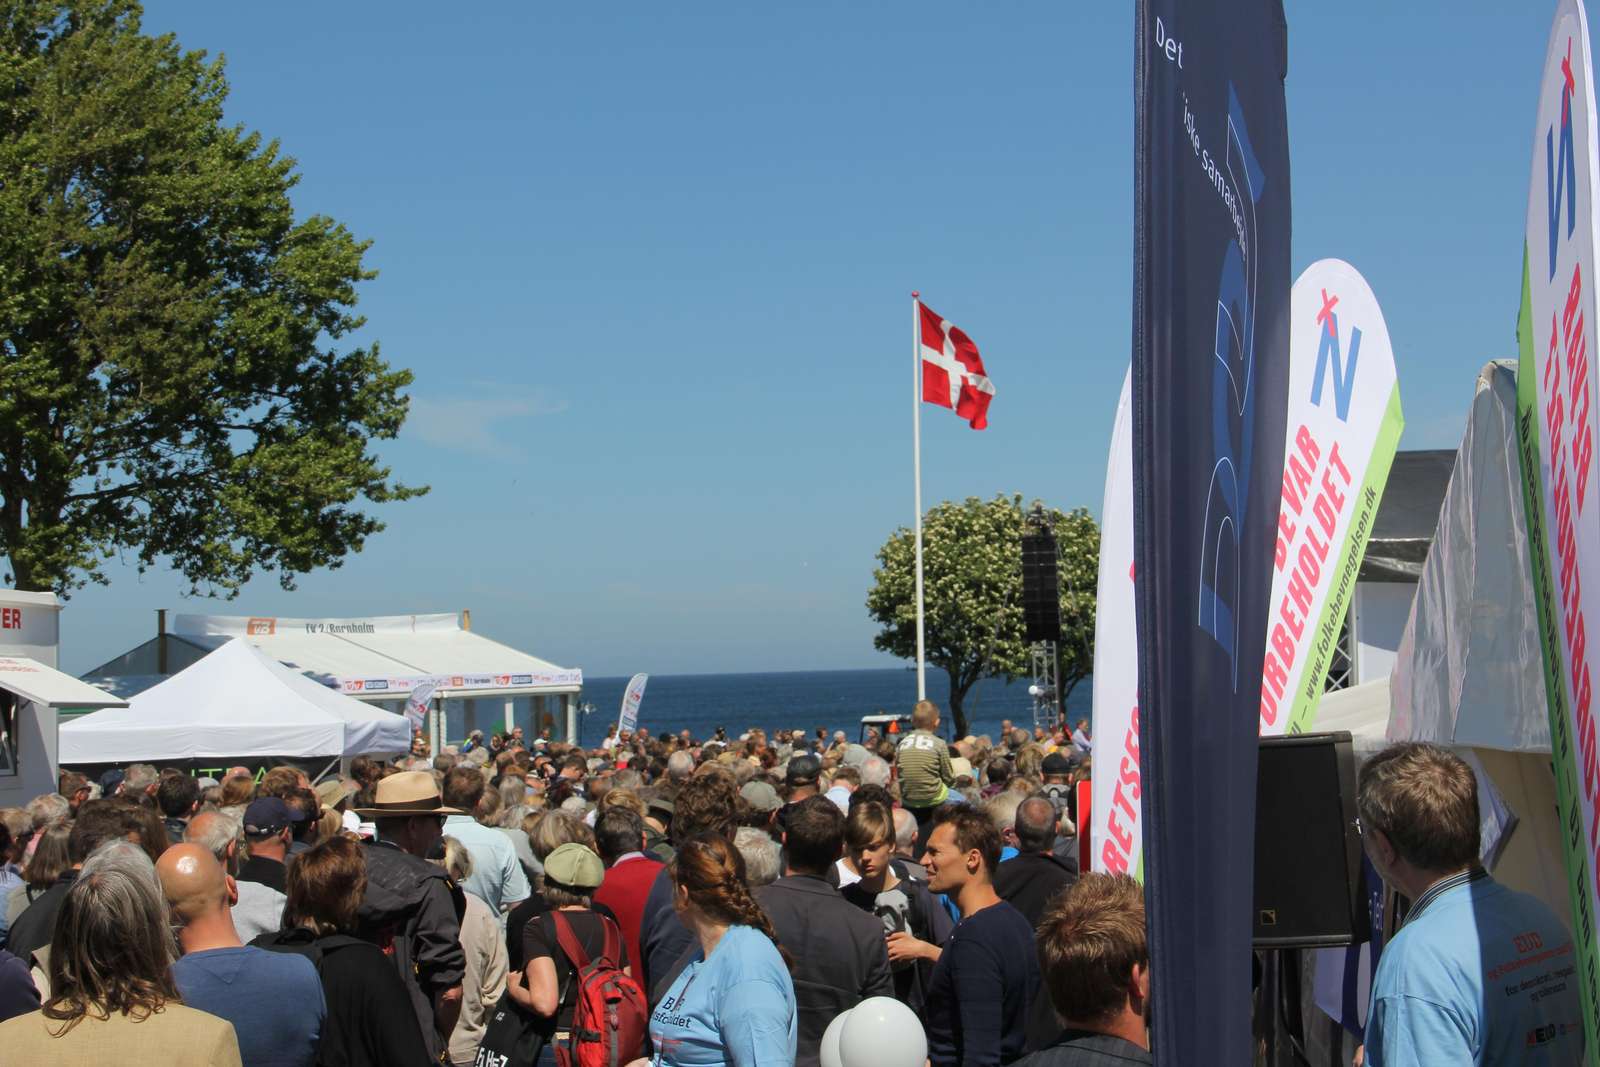 The people's meeting Bornholm 2015